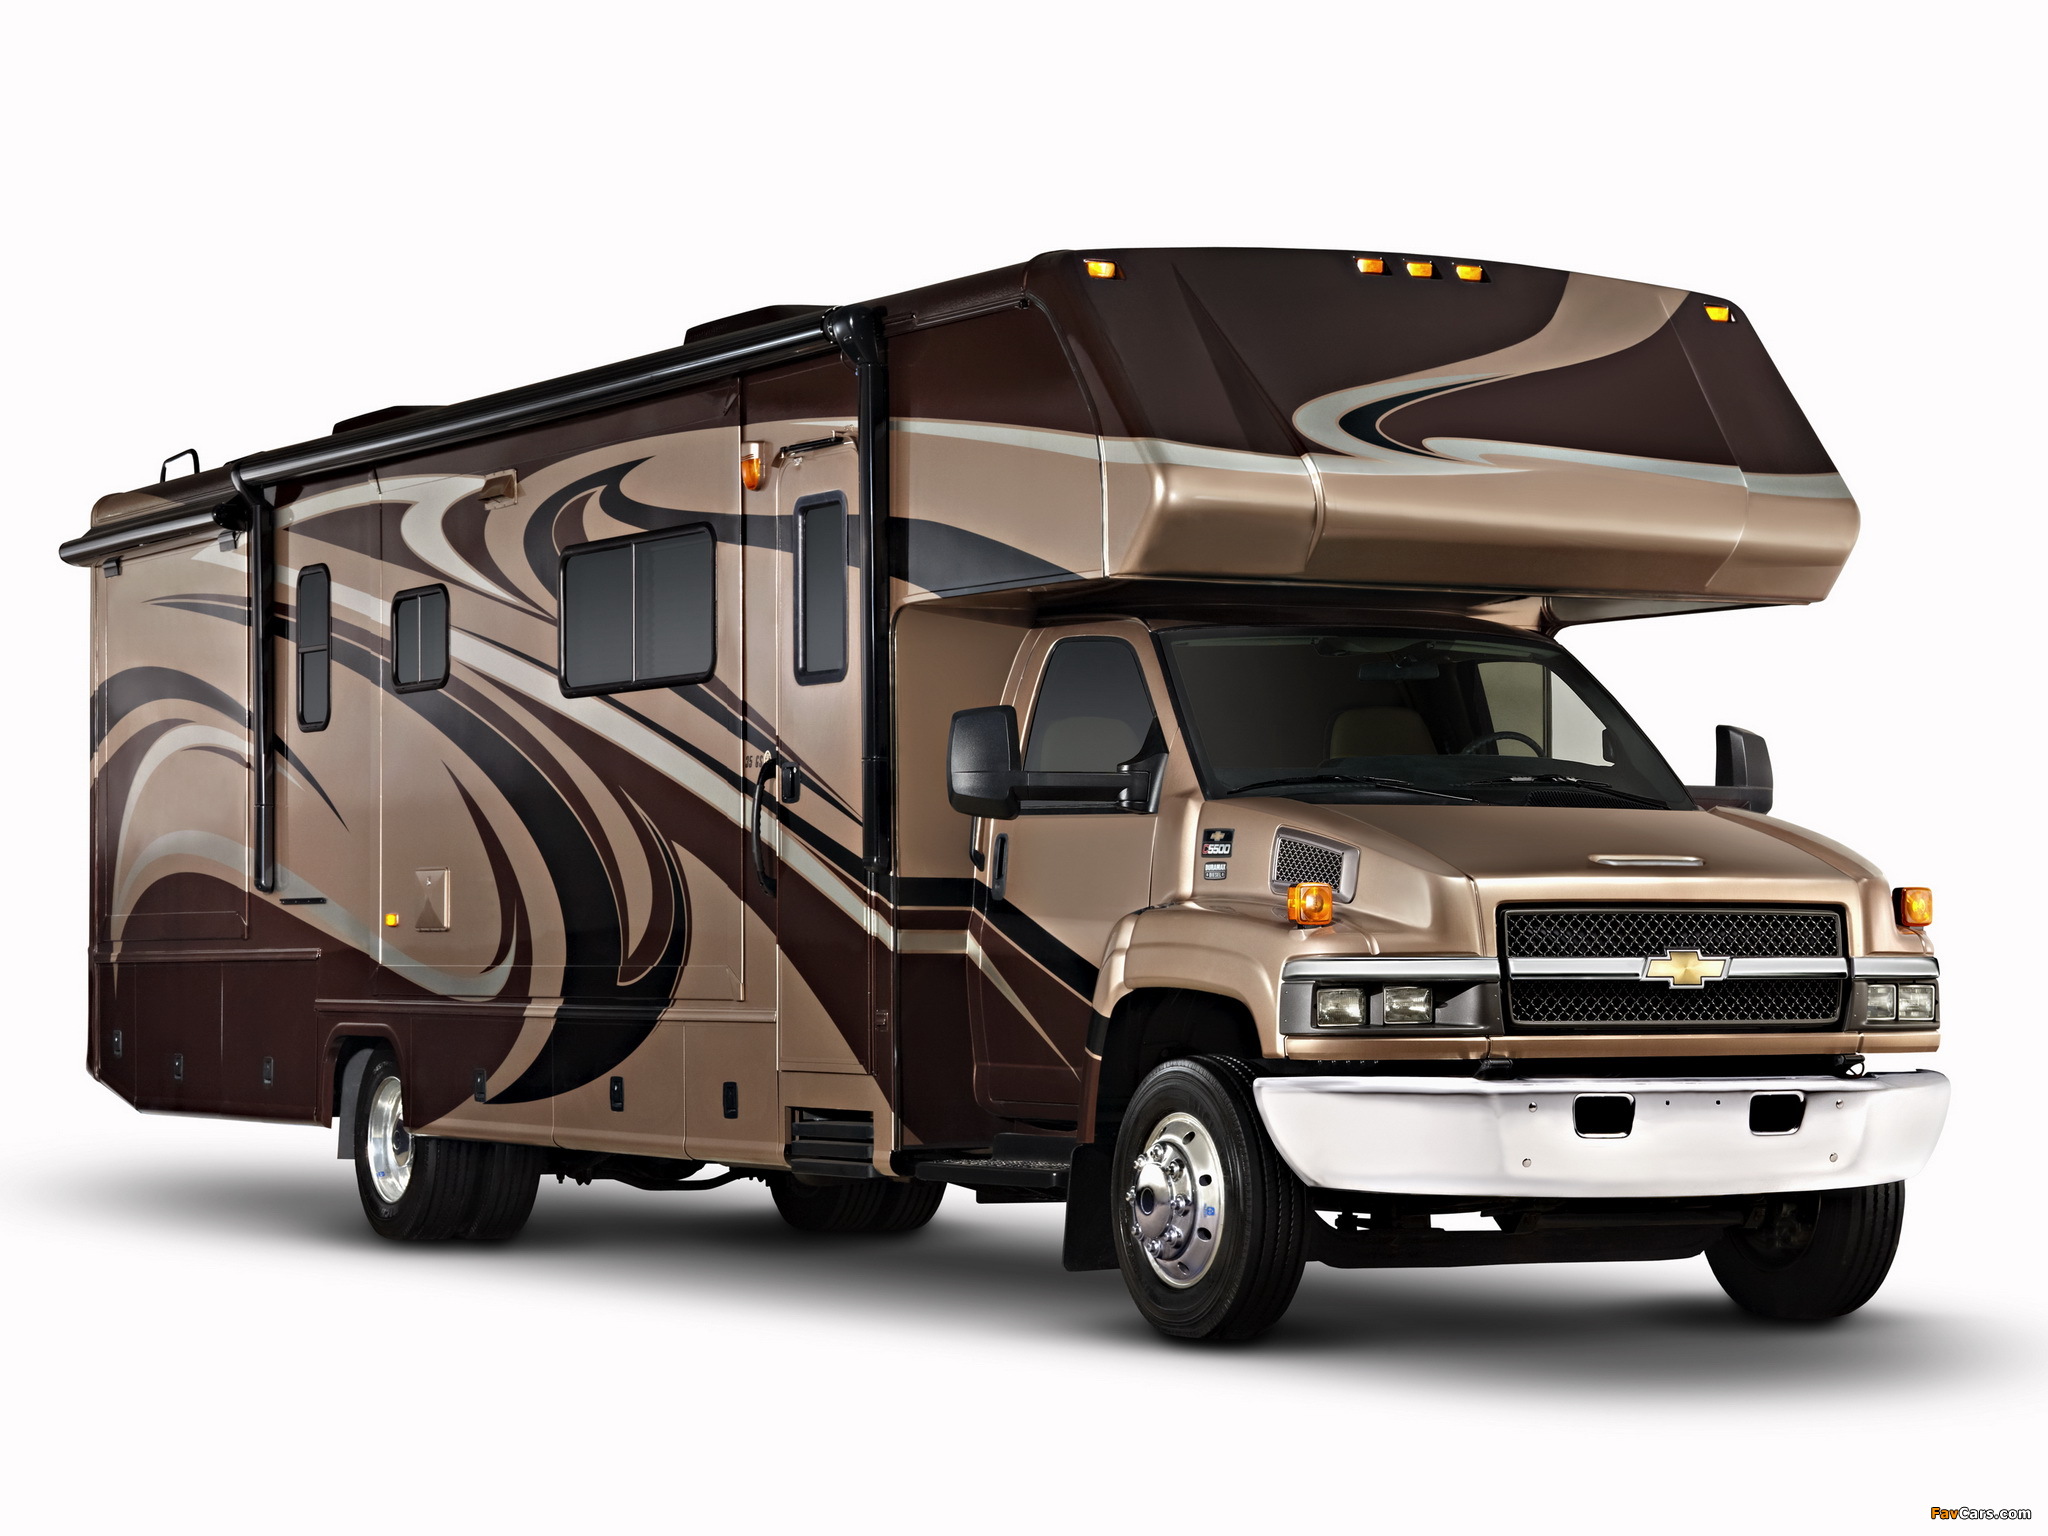 Images of Chevrolet Express C5500 Cutaway RV 2010 (2048 x 1536)